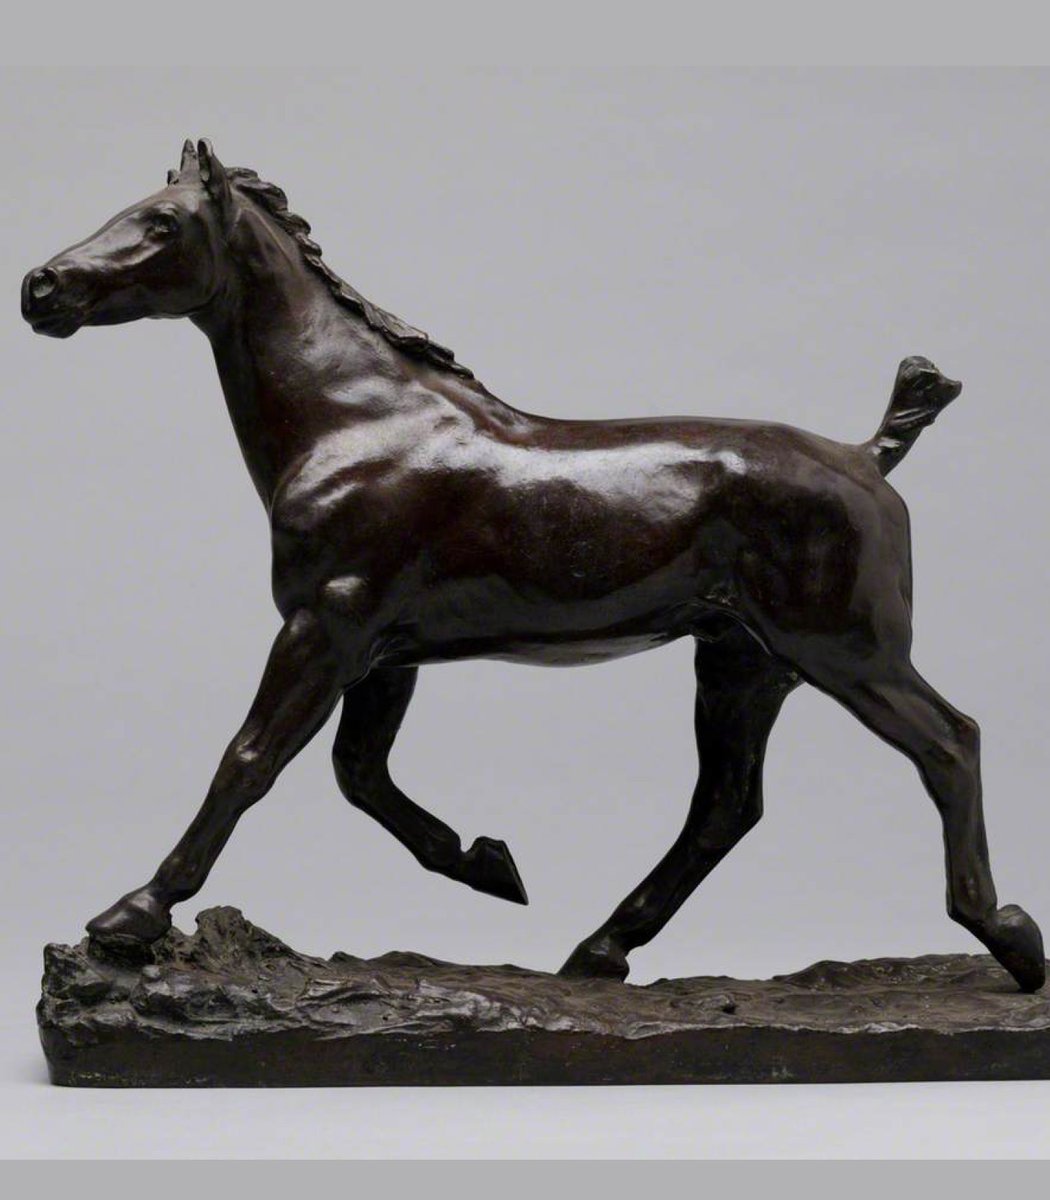 In Black Death, Sean is quartered by horses!We have this sculpture by Louis de Monard (1873 – 1939): Bronze Horse, date unknown. Donated by the Mayor of Dijon, York’s twin city in France.